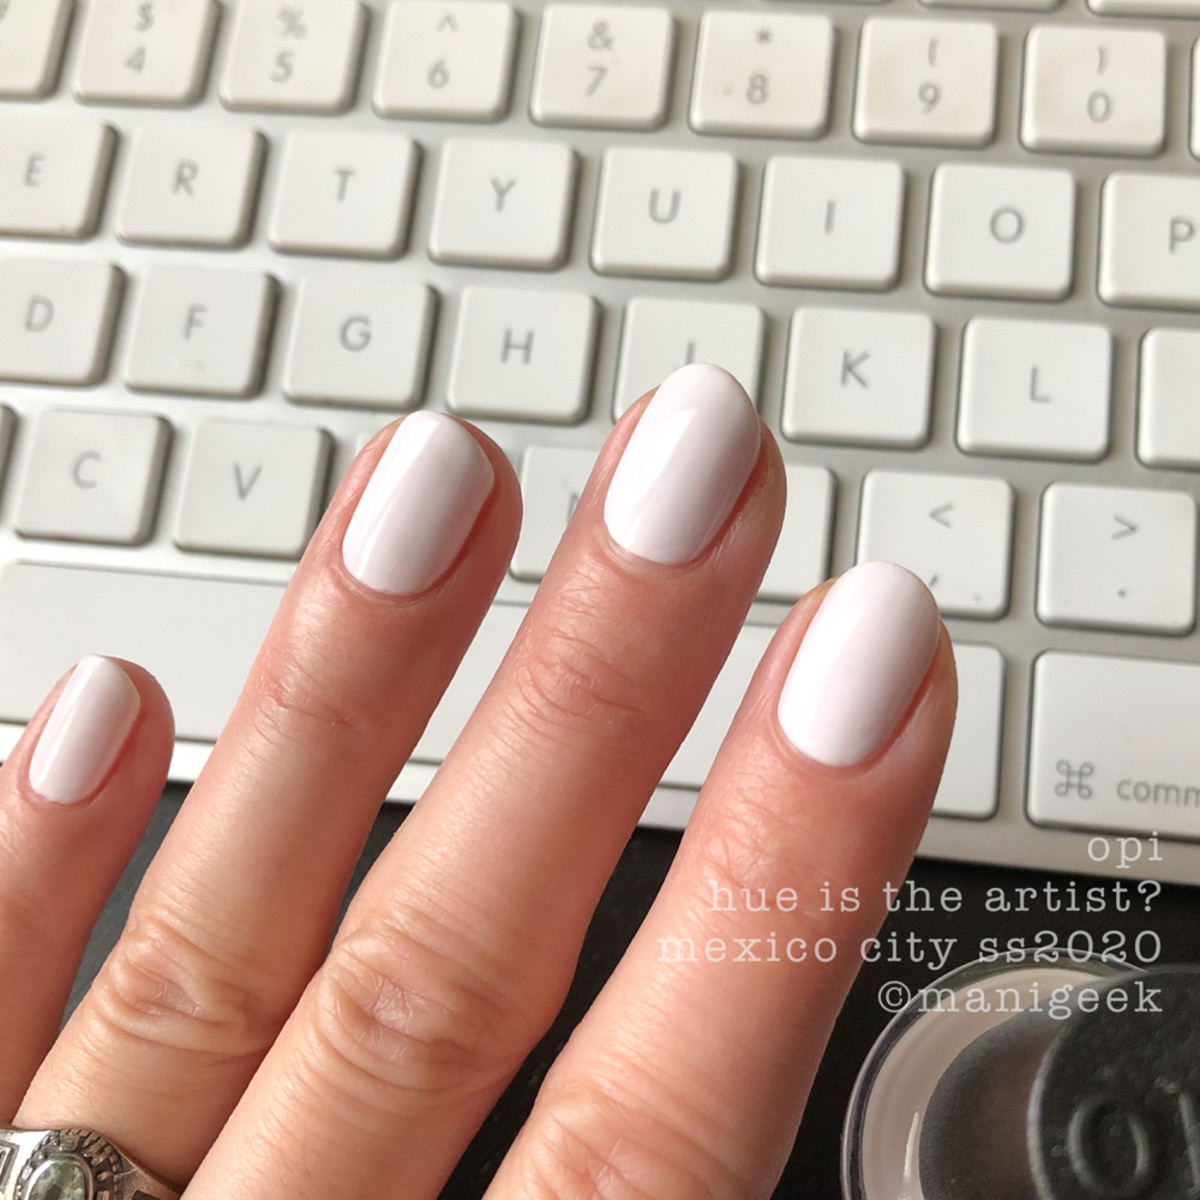 OPI Hue Is The Artist - OPI Mexico City Swatches Review 2020